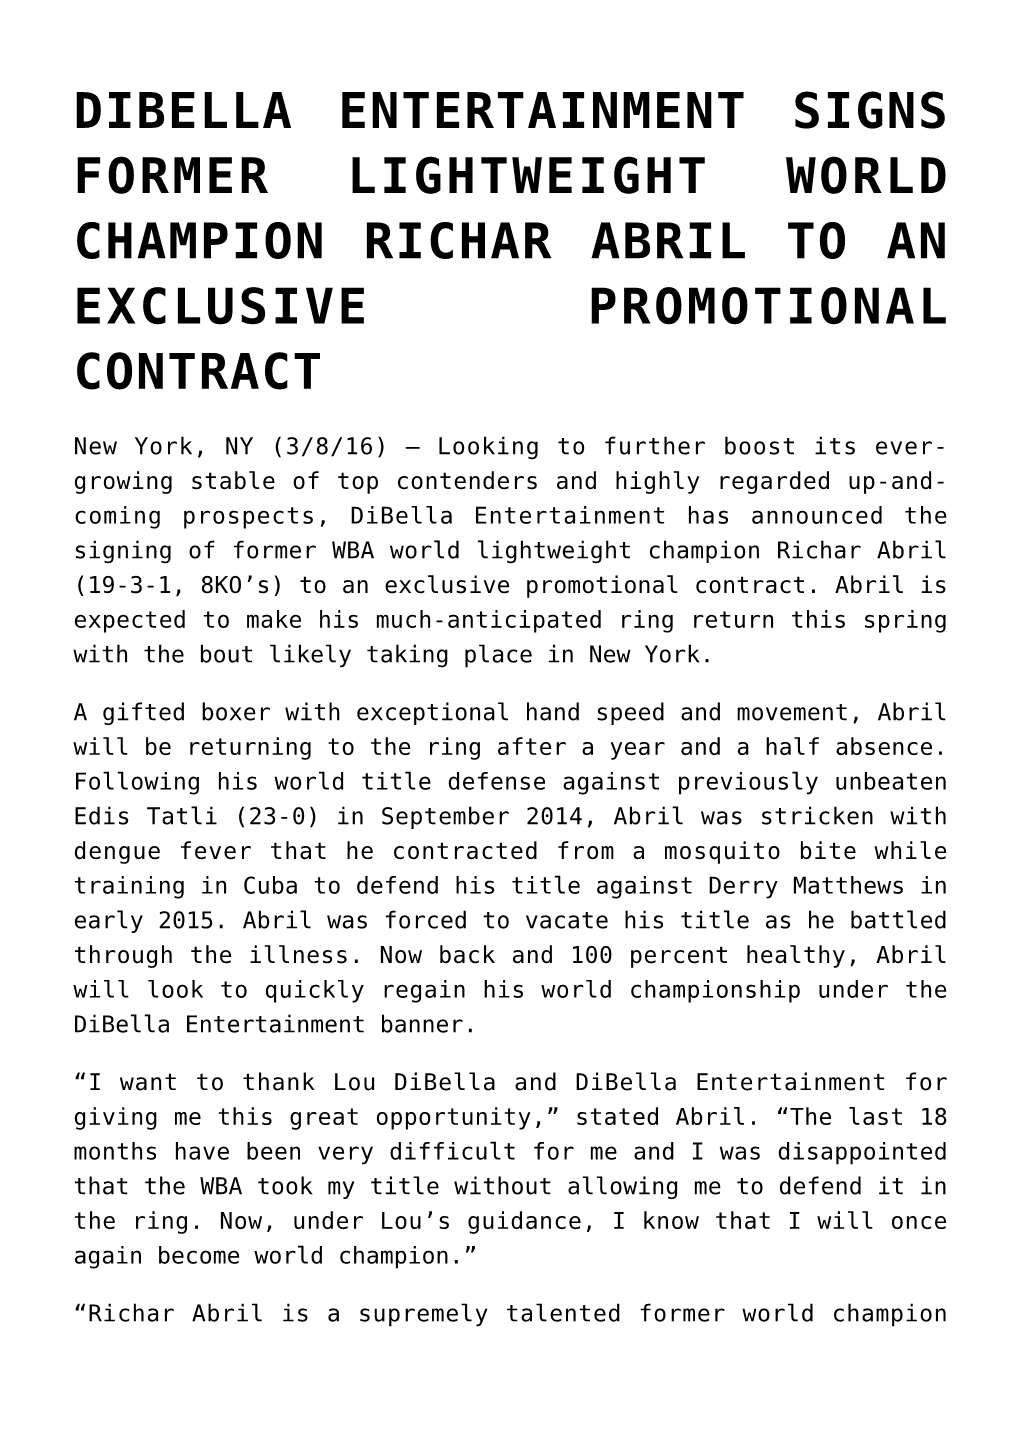 Dibella Entertainment Signs Former Lightweight World Champion Richar Abril to an Exclusive Promotional Contract